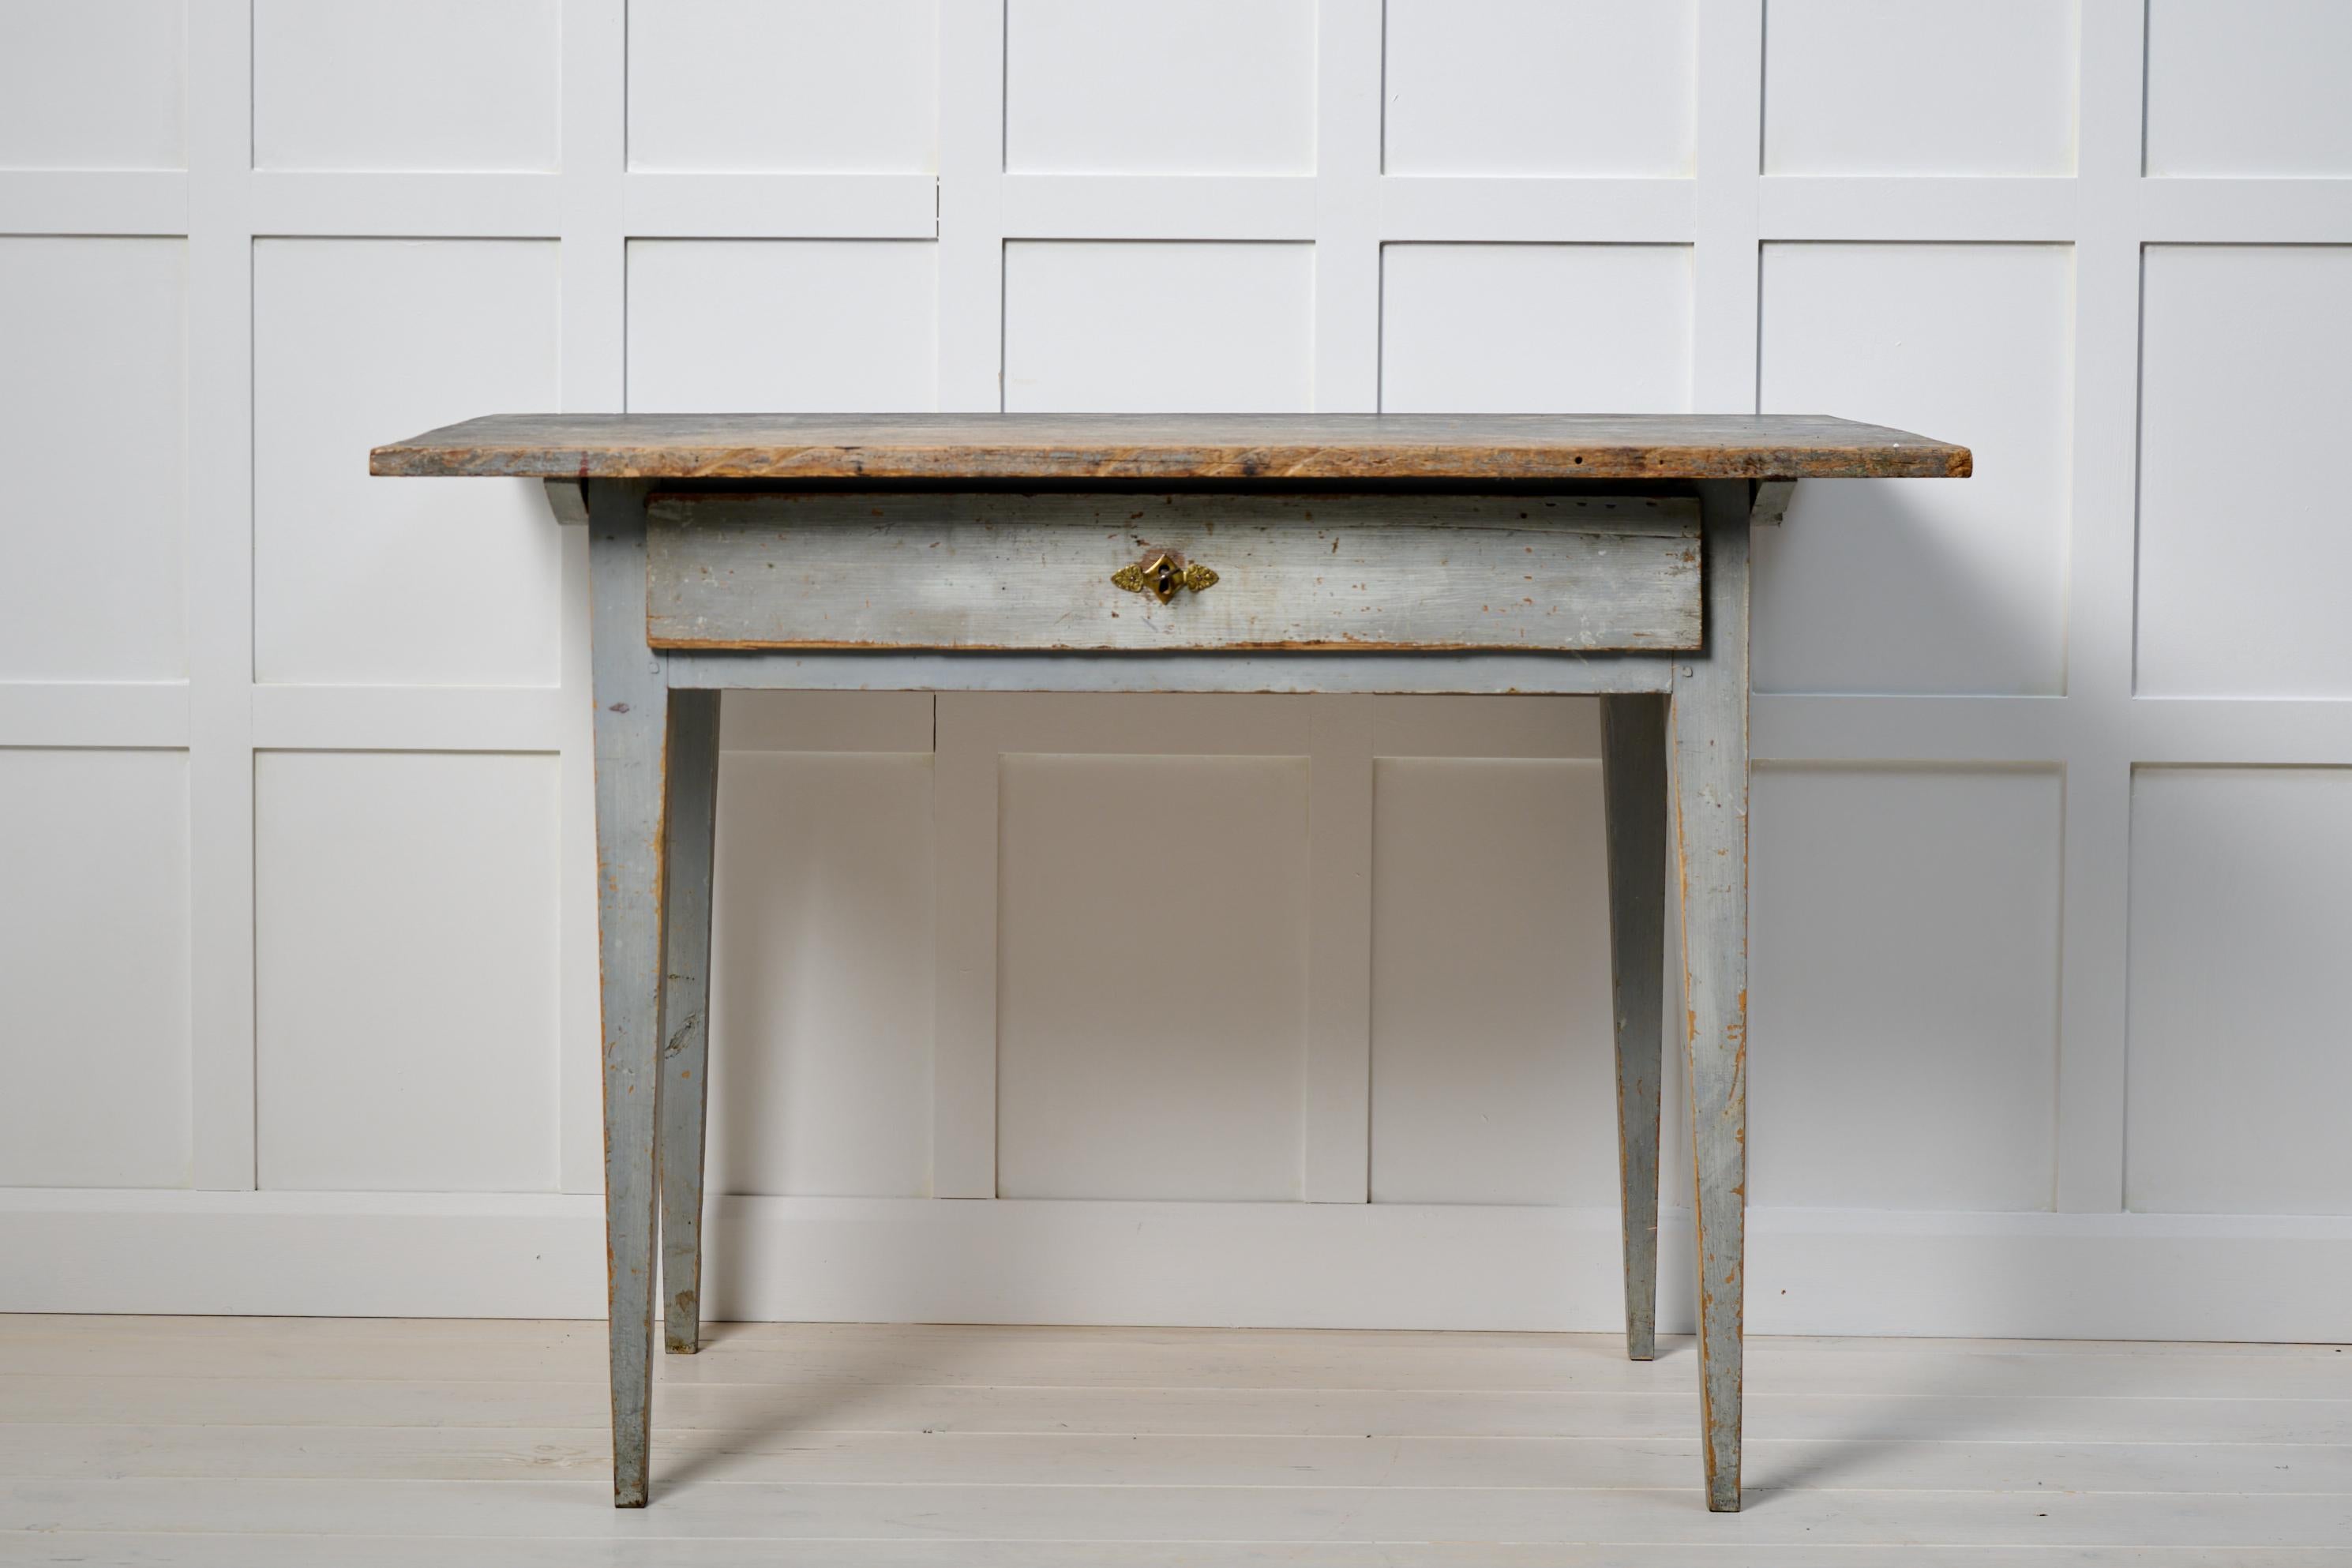 Genuine antique Swedish table in gustavian style. This side or wall table is a genuine northern Swedish country house furniture from 1810 to 1820. Made in solid pine with straight tapered legs. A functional drawer with old hardware in brass and